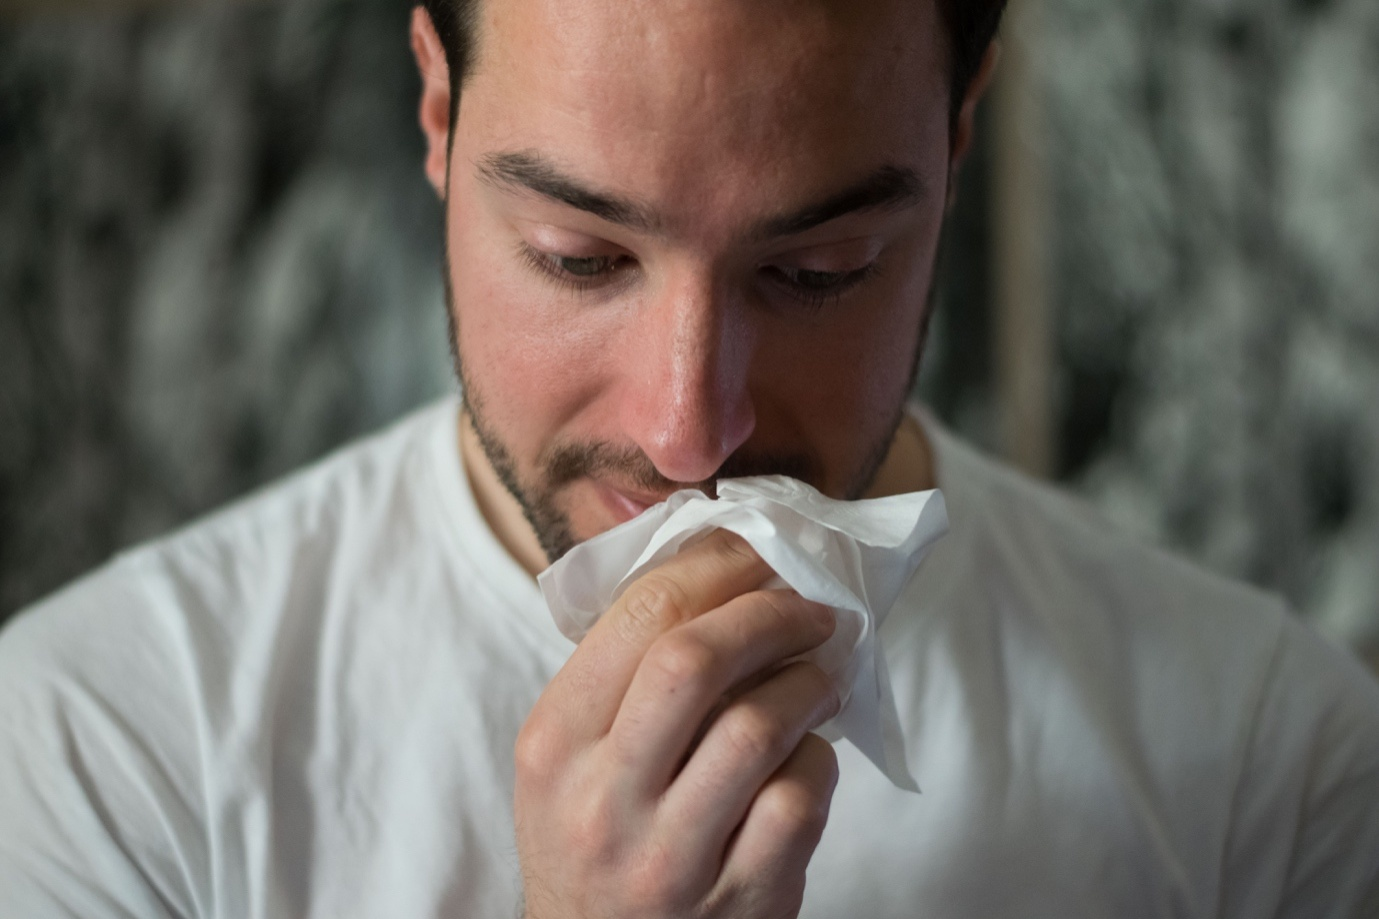 A person holding a tissue to their nose